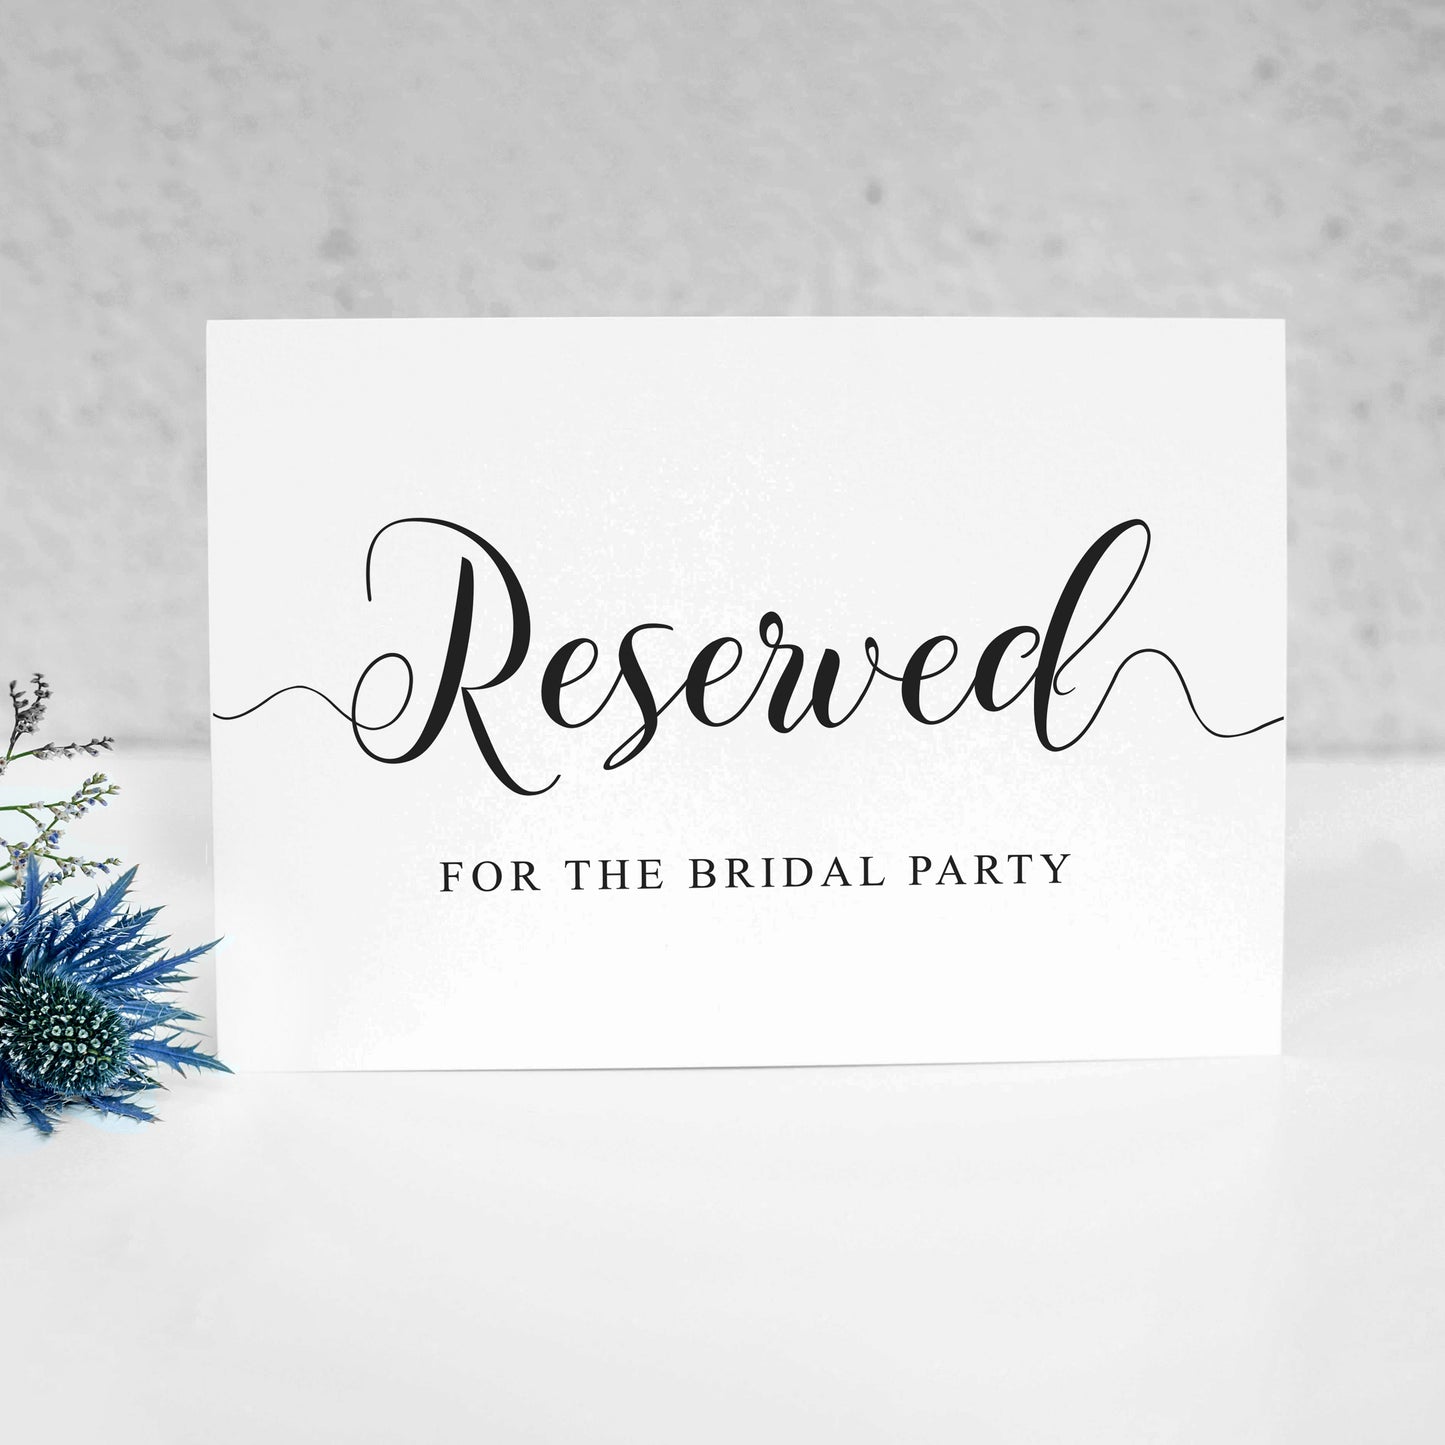 Reserved seat sign printed on card